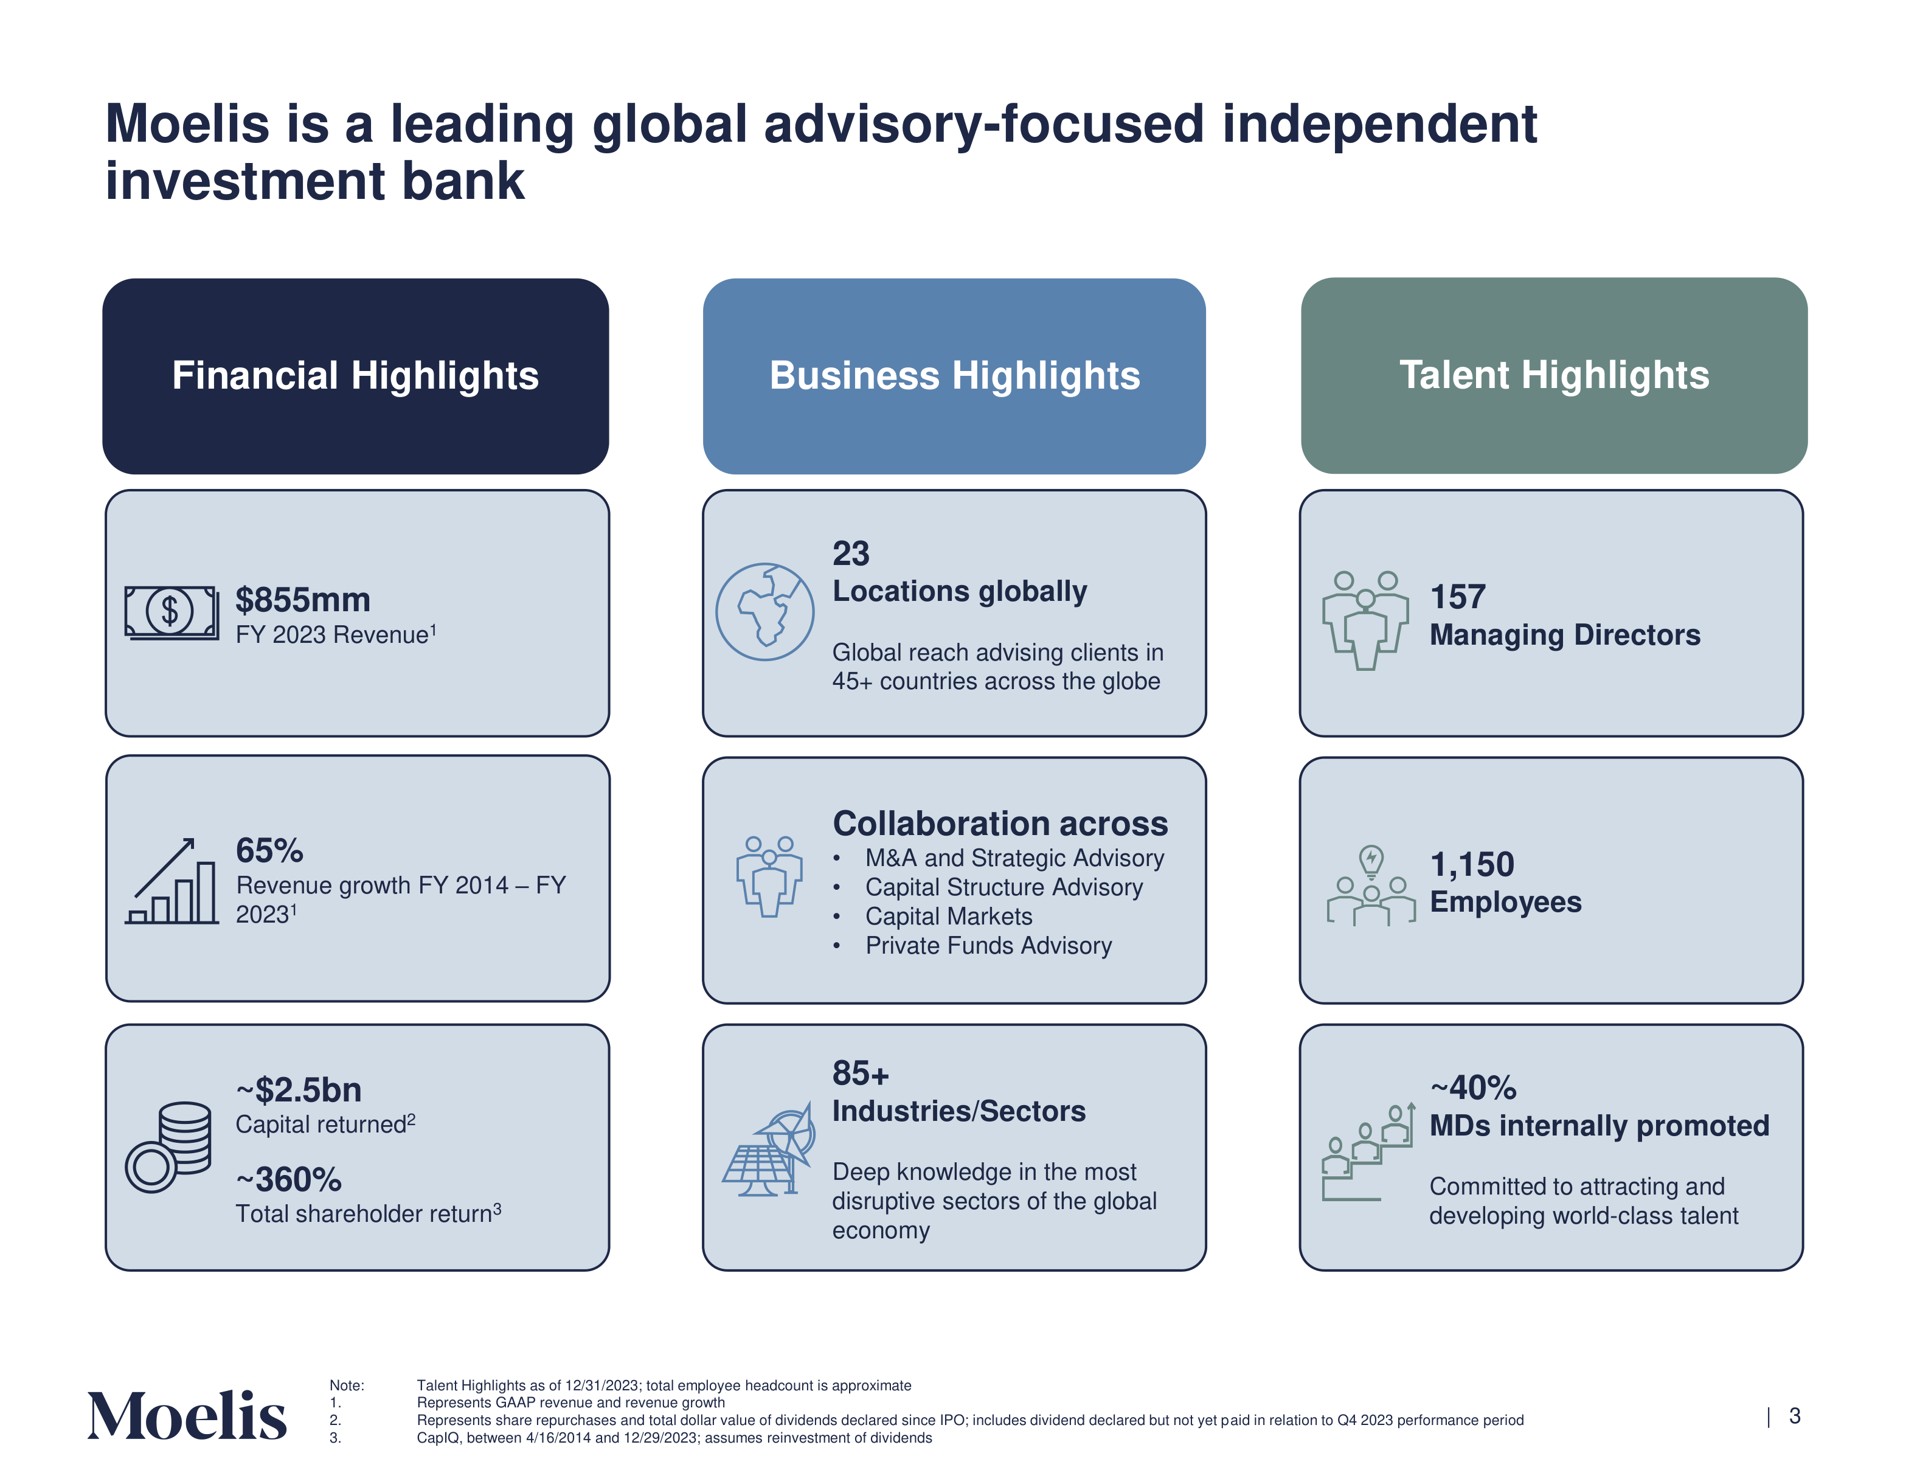 is a leading global advisory focused independent investment bank | Moelis & Company